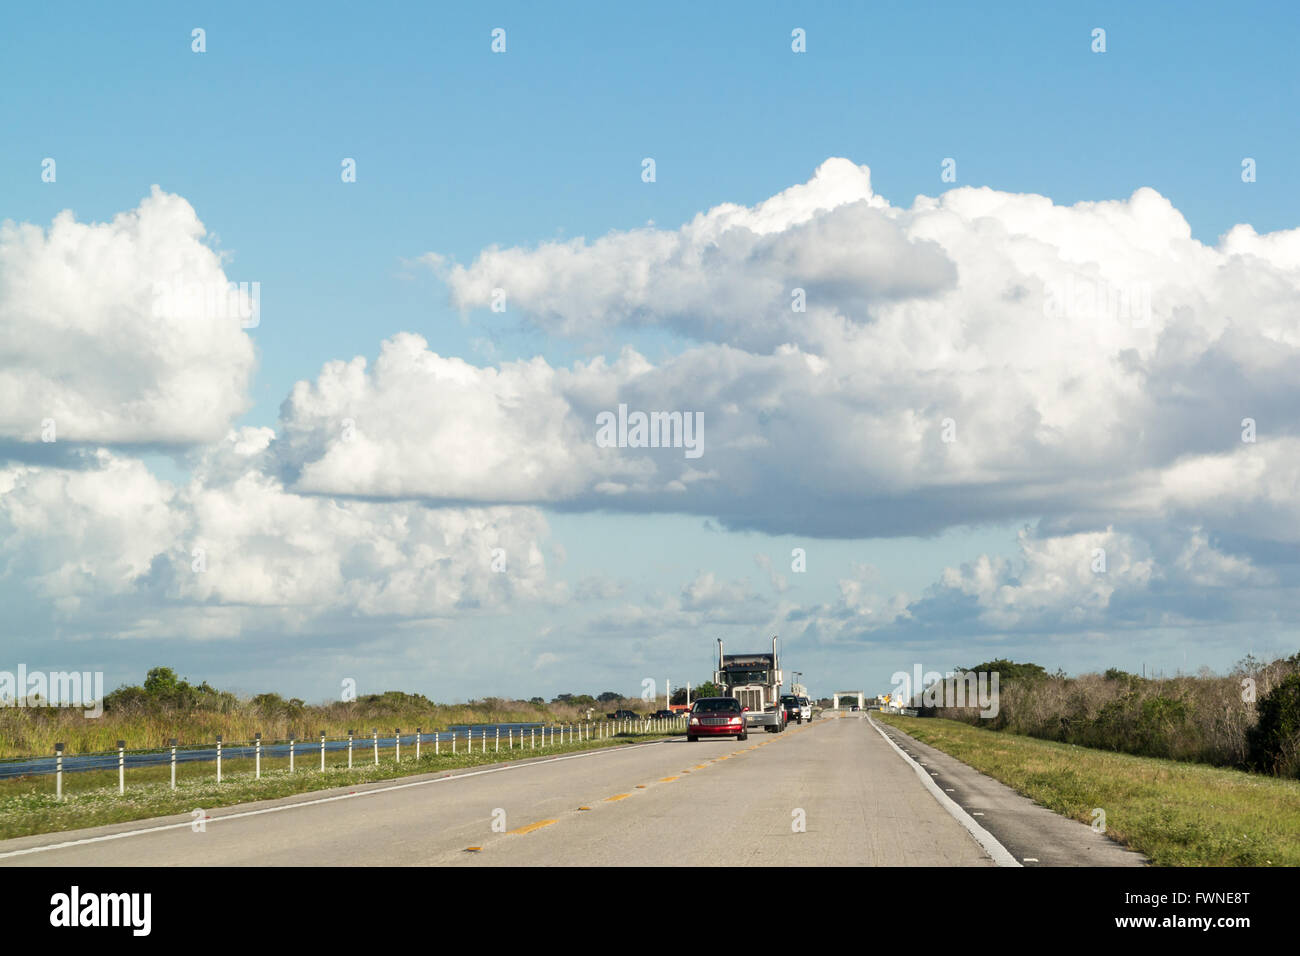 Traffic on Tamiami Trail, US 41, in Big Cypress National Reserve, Everglades, Florida, USA Stock Photo